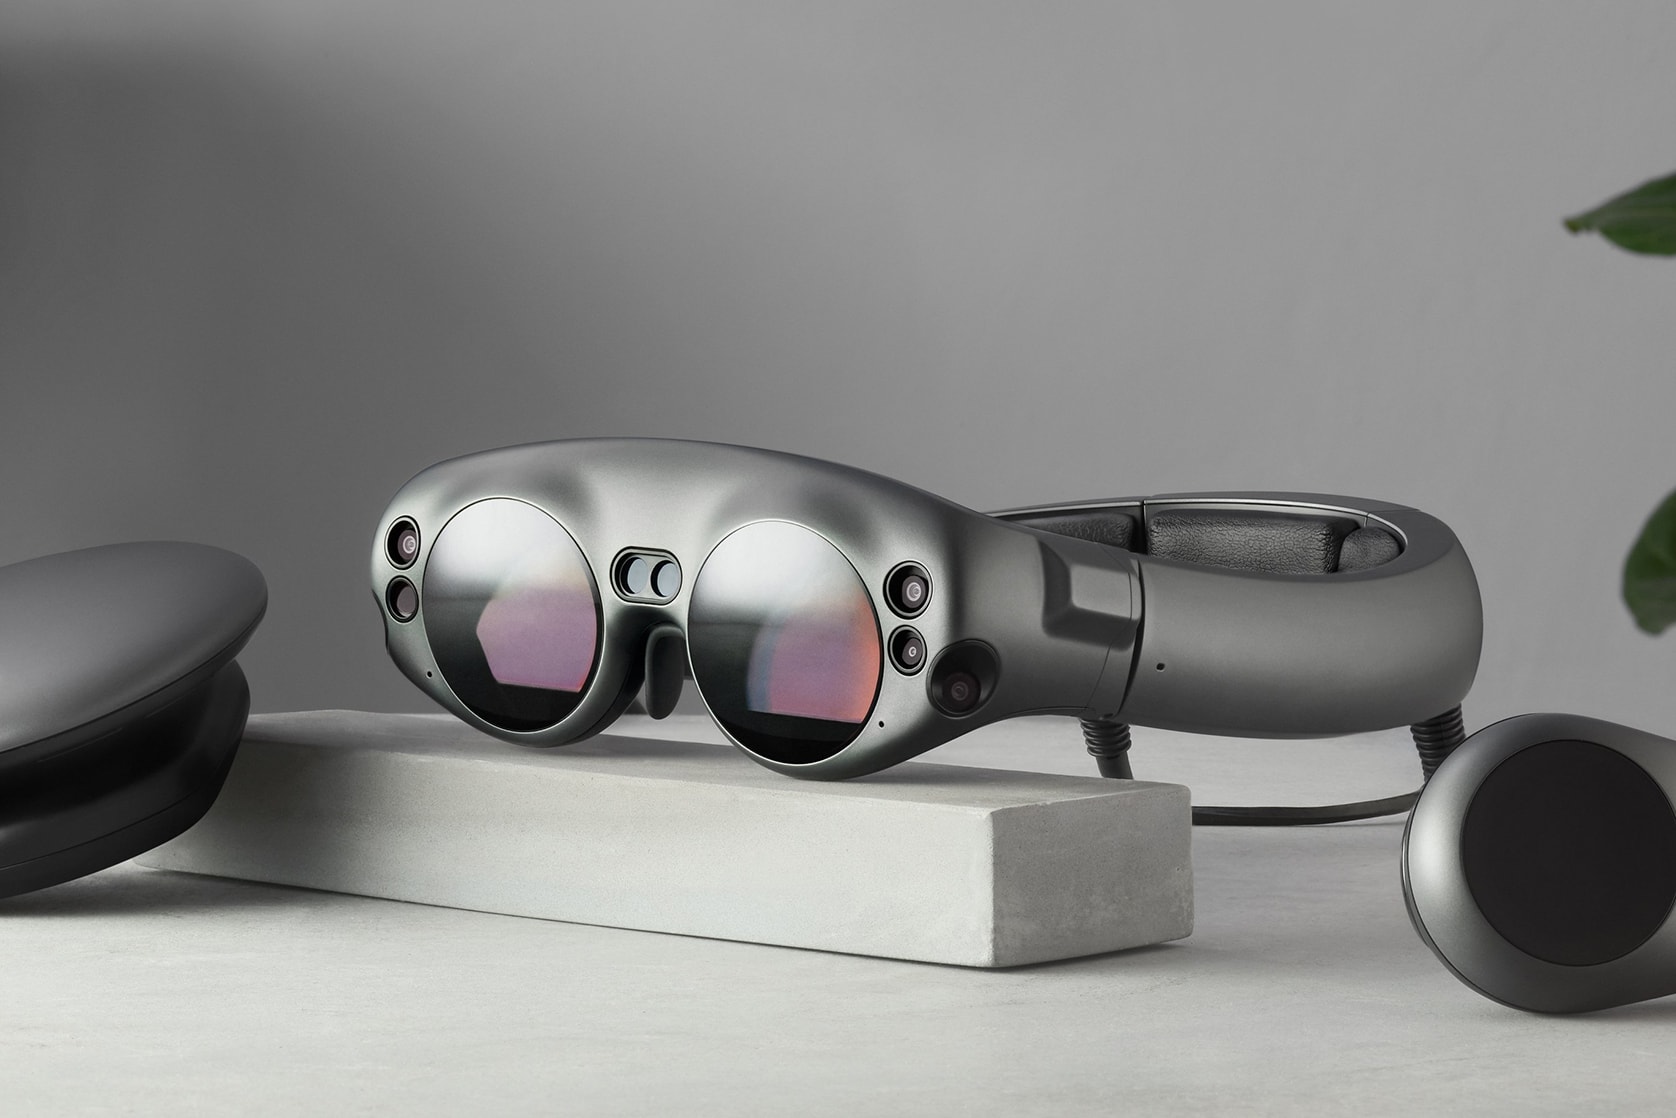 Magic Leap NBA Shaquille O'Neal Augmented Reality Goggles Streaming Service